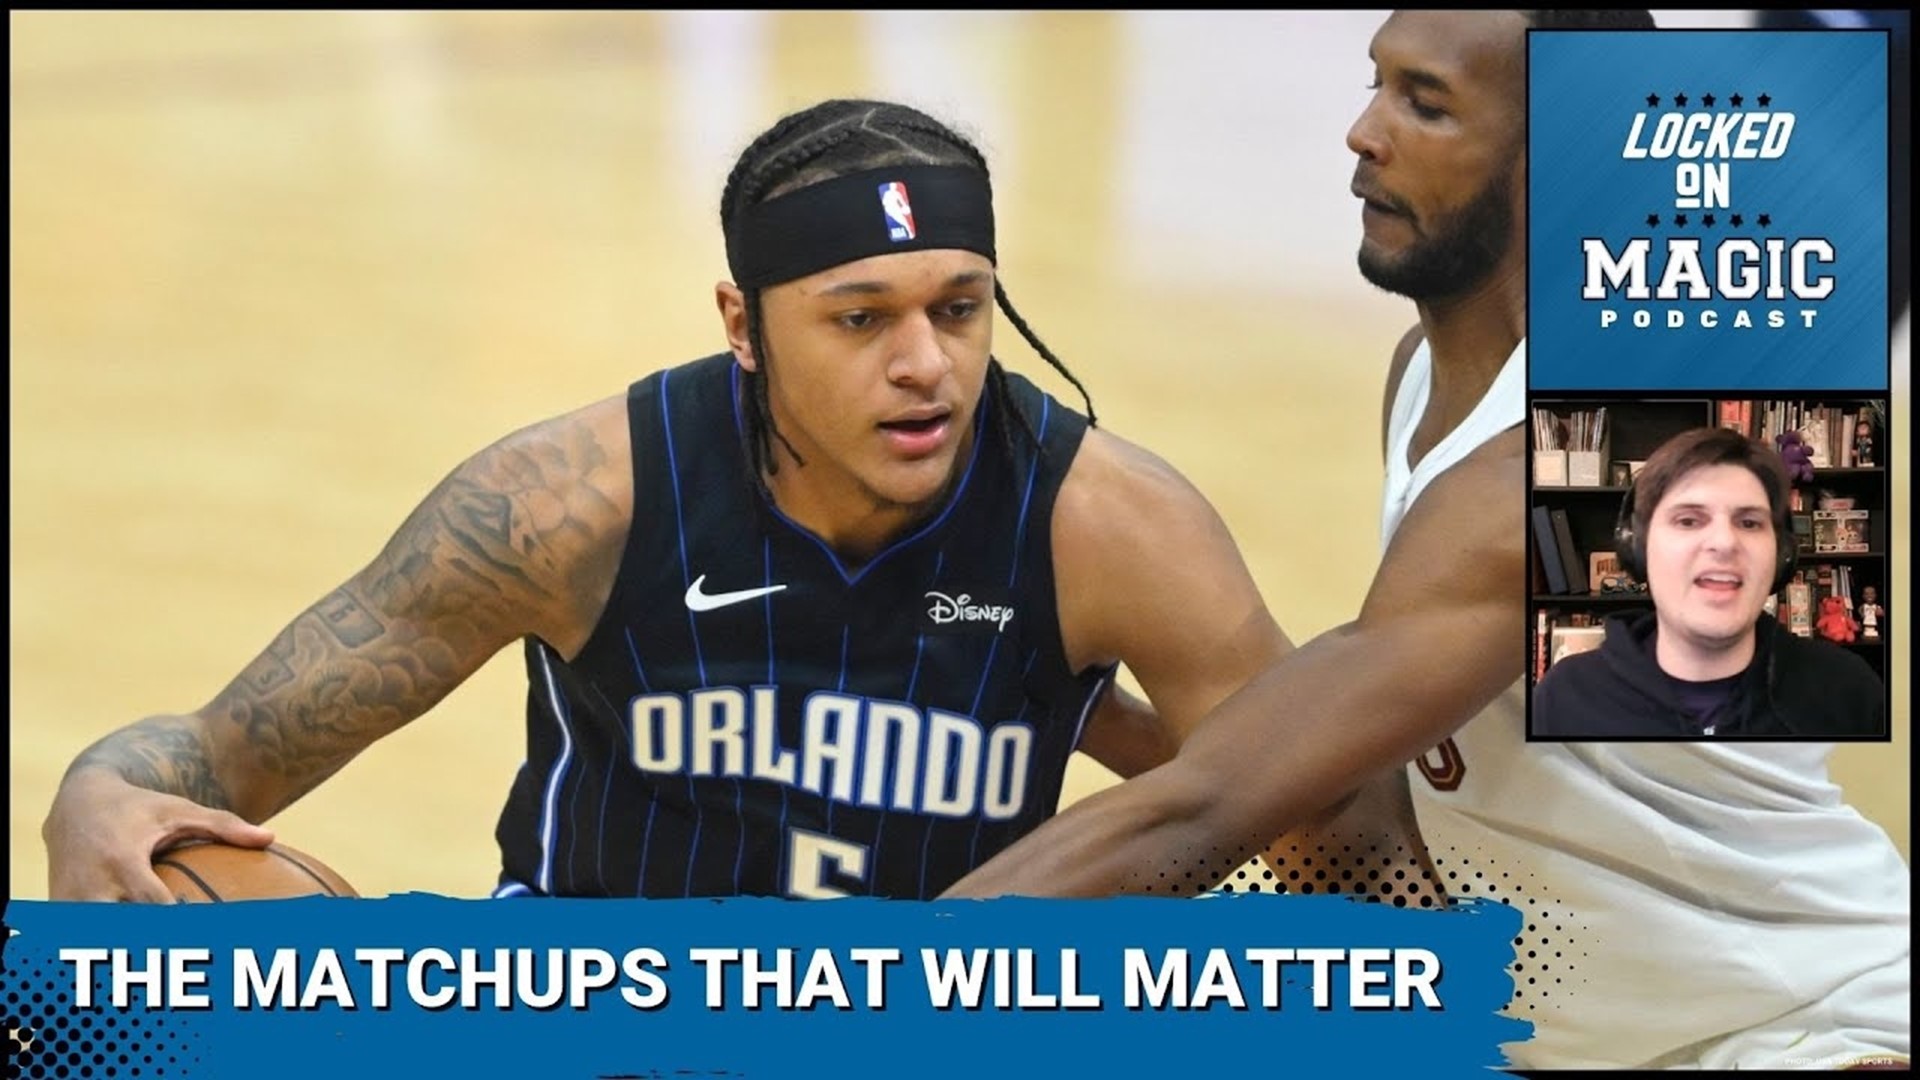 The Orlando Magic are getting ready for their first-round series against the Cleveland Cavaliers.